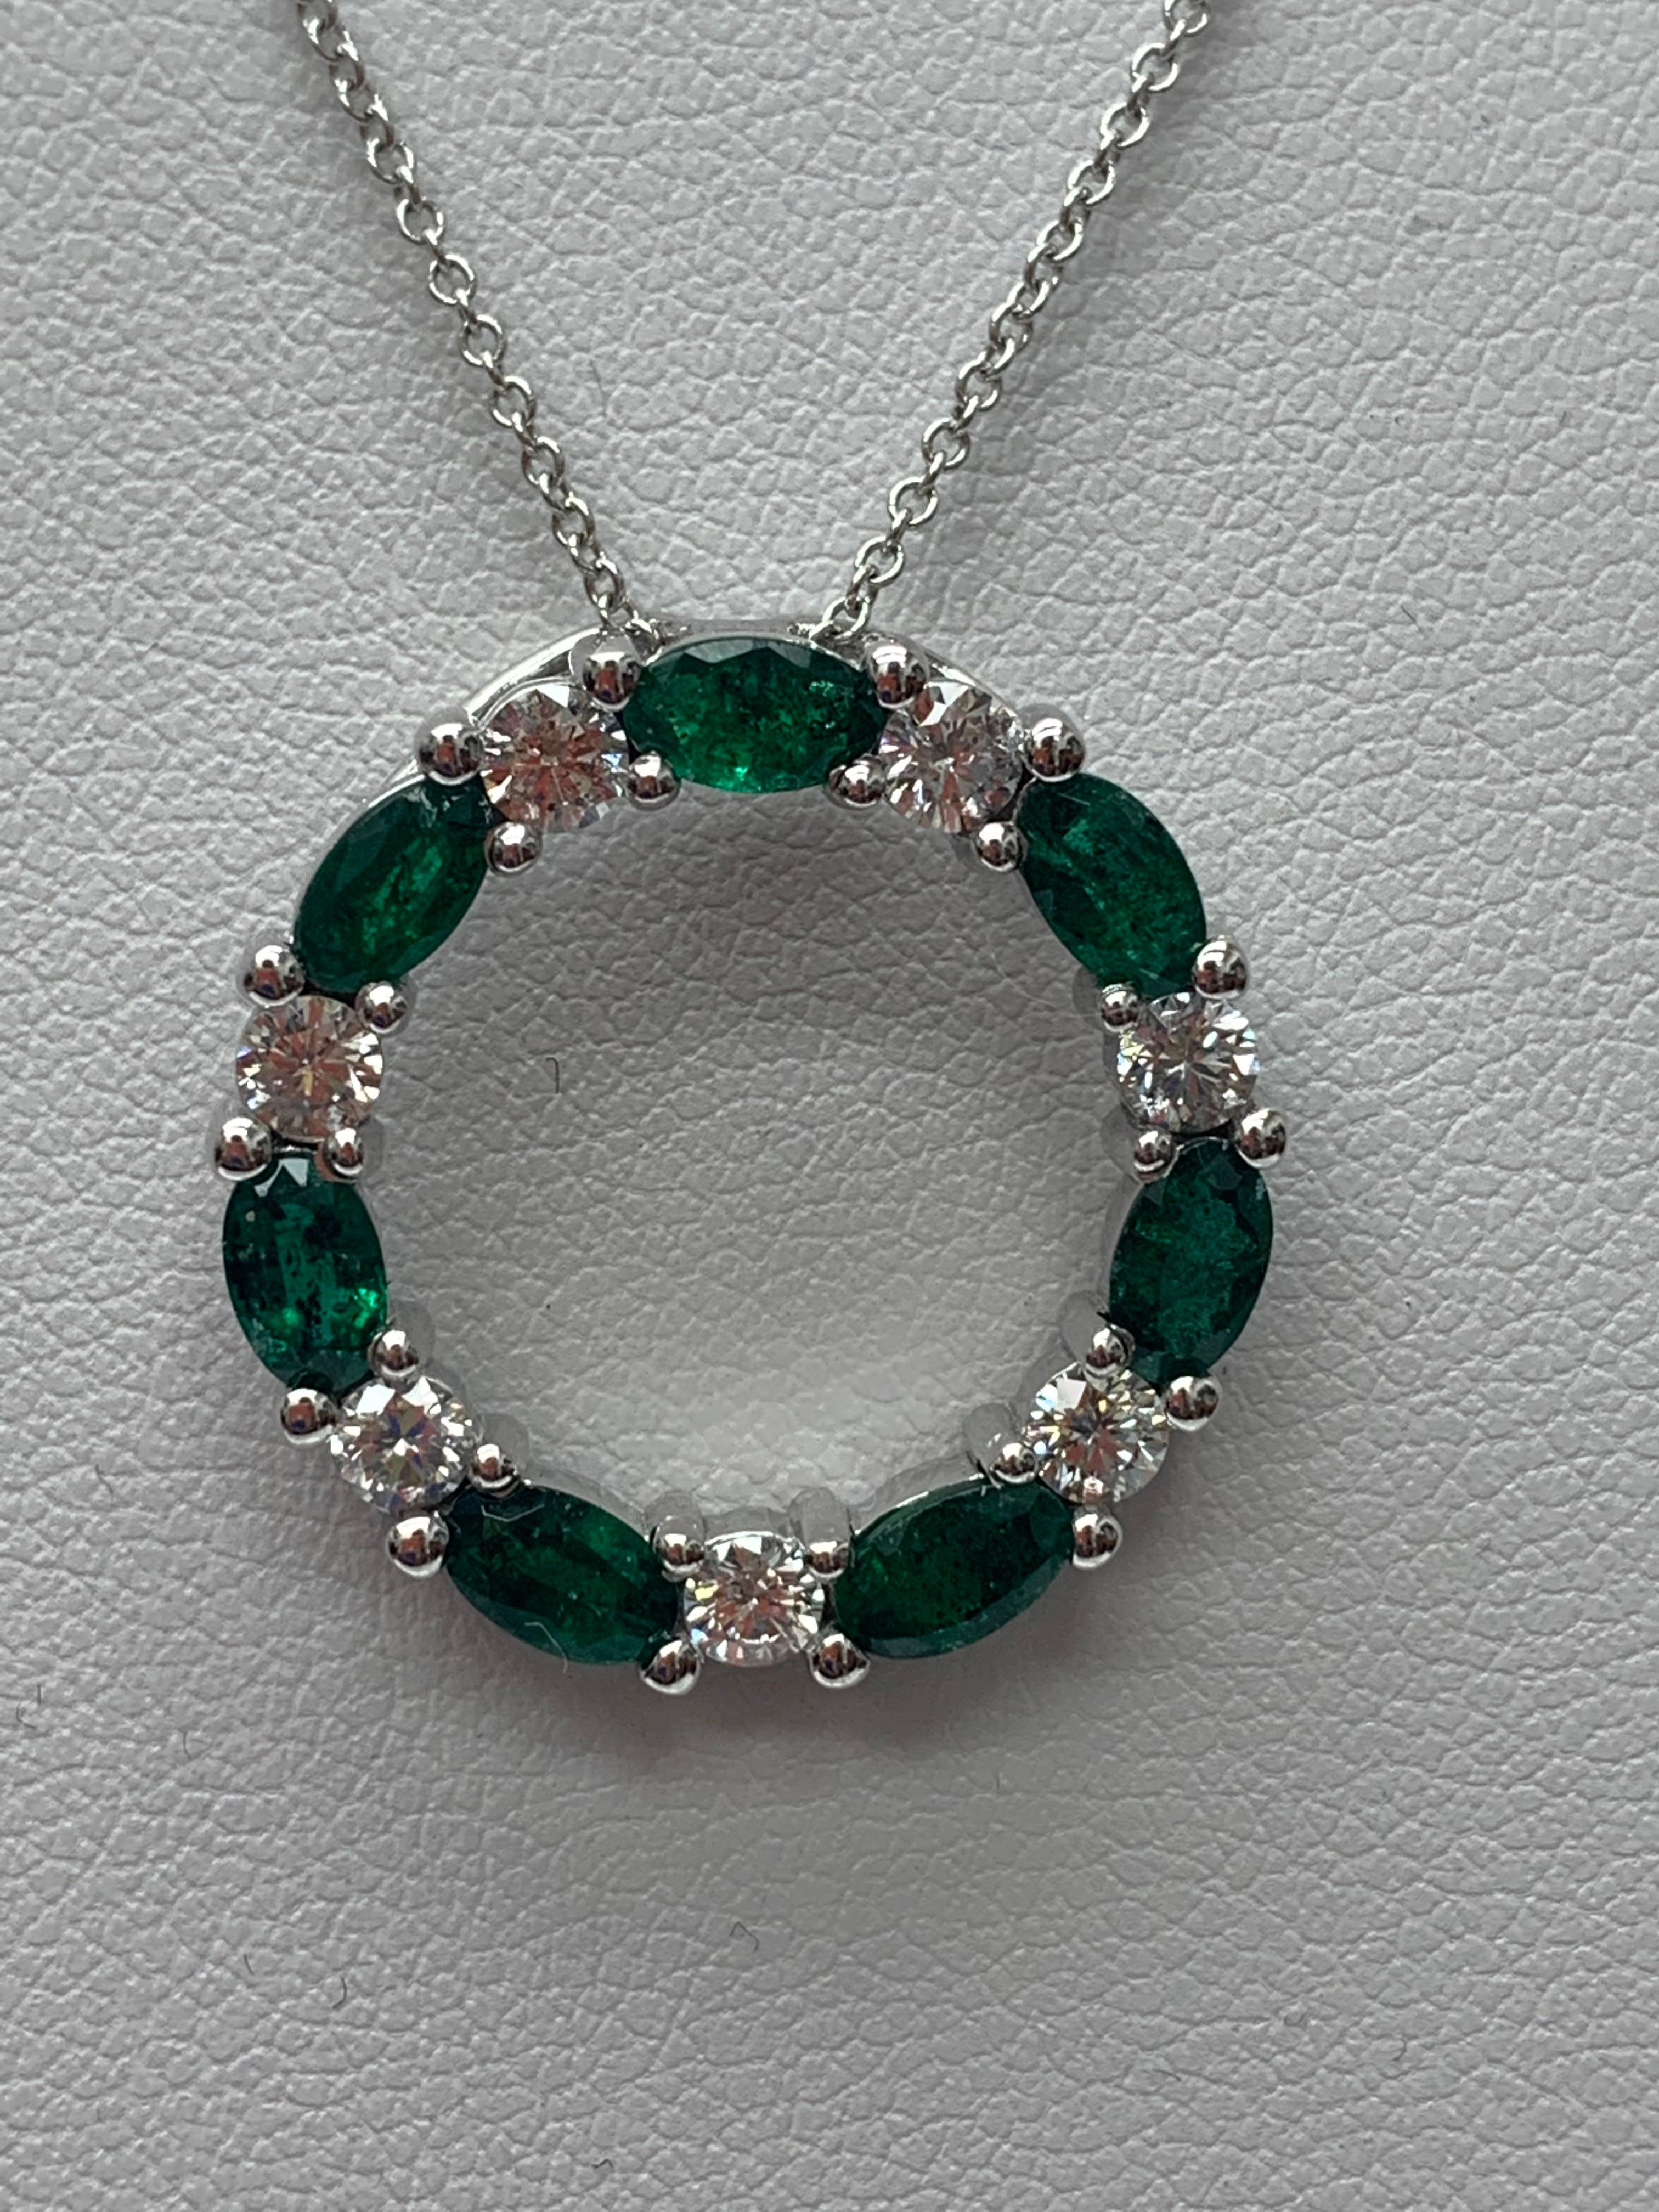 A stylish pendant necklace showcasing a row of Emerald alternating diamonds, set in an open-work, circular design. 7 oval shape emeralds weigh 1.65 carats and 7 brilliant-cut diamonds weigh 0.71 carats in total. All diamonds are GH color SI1